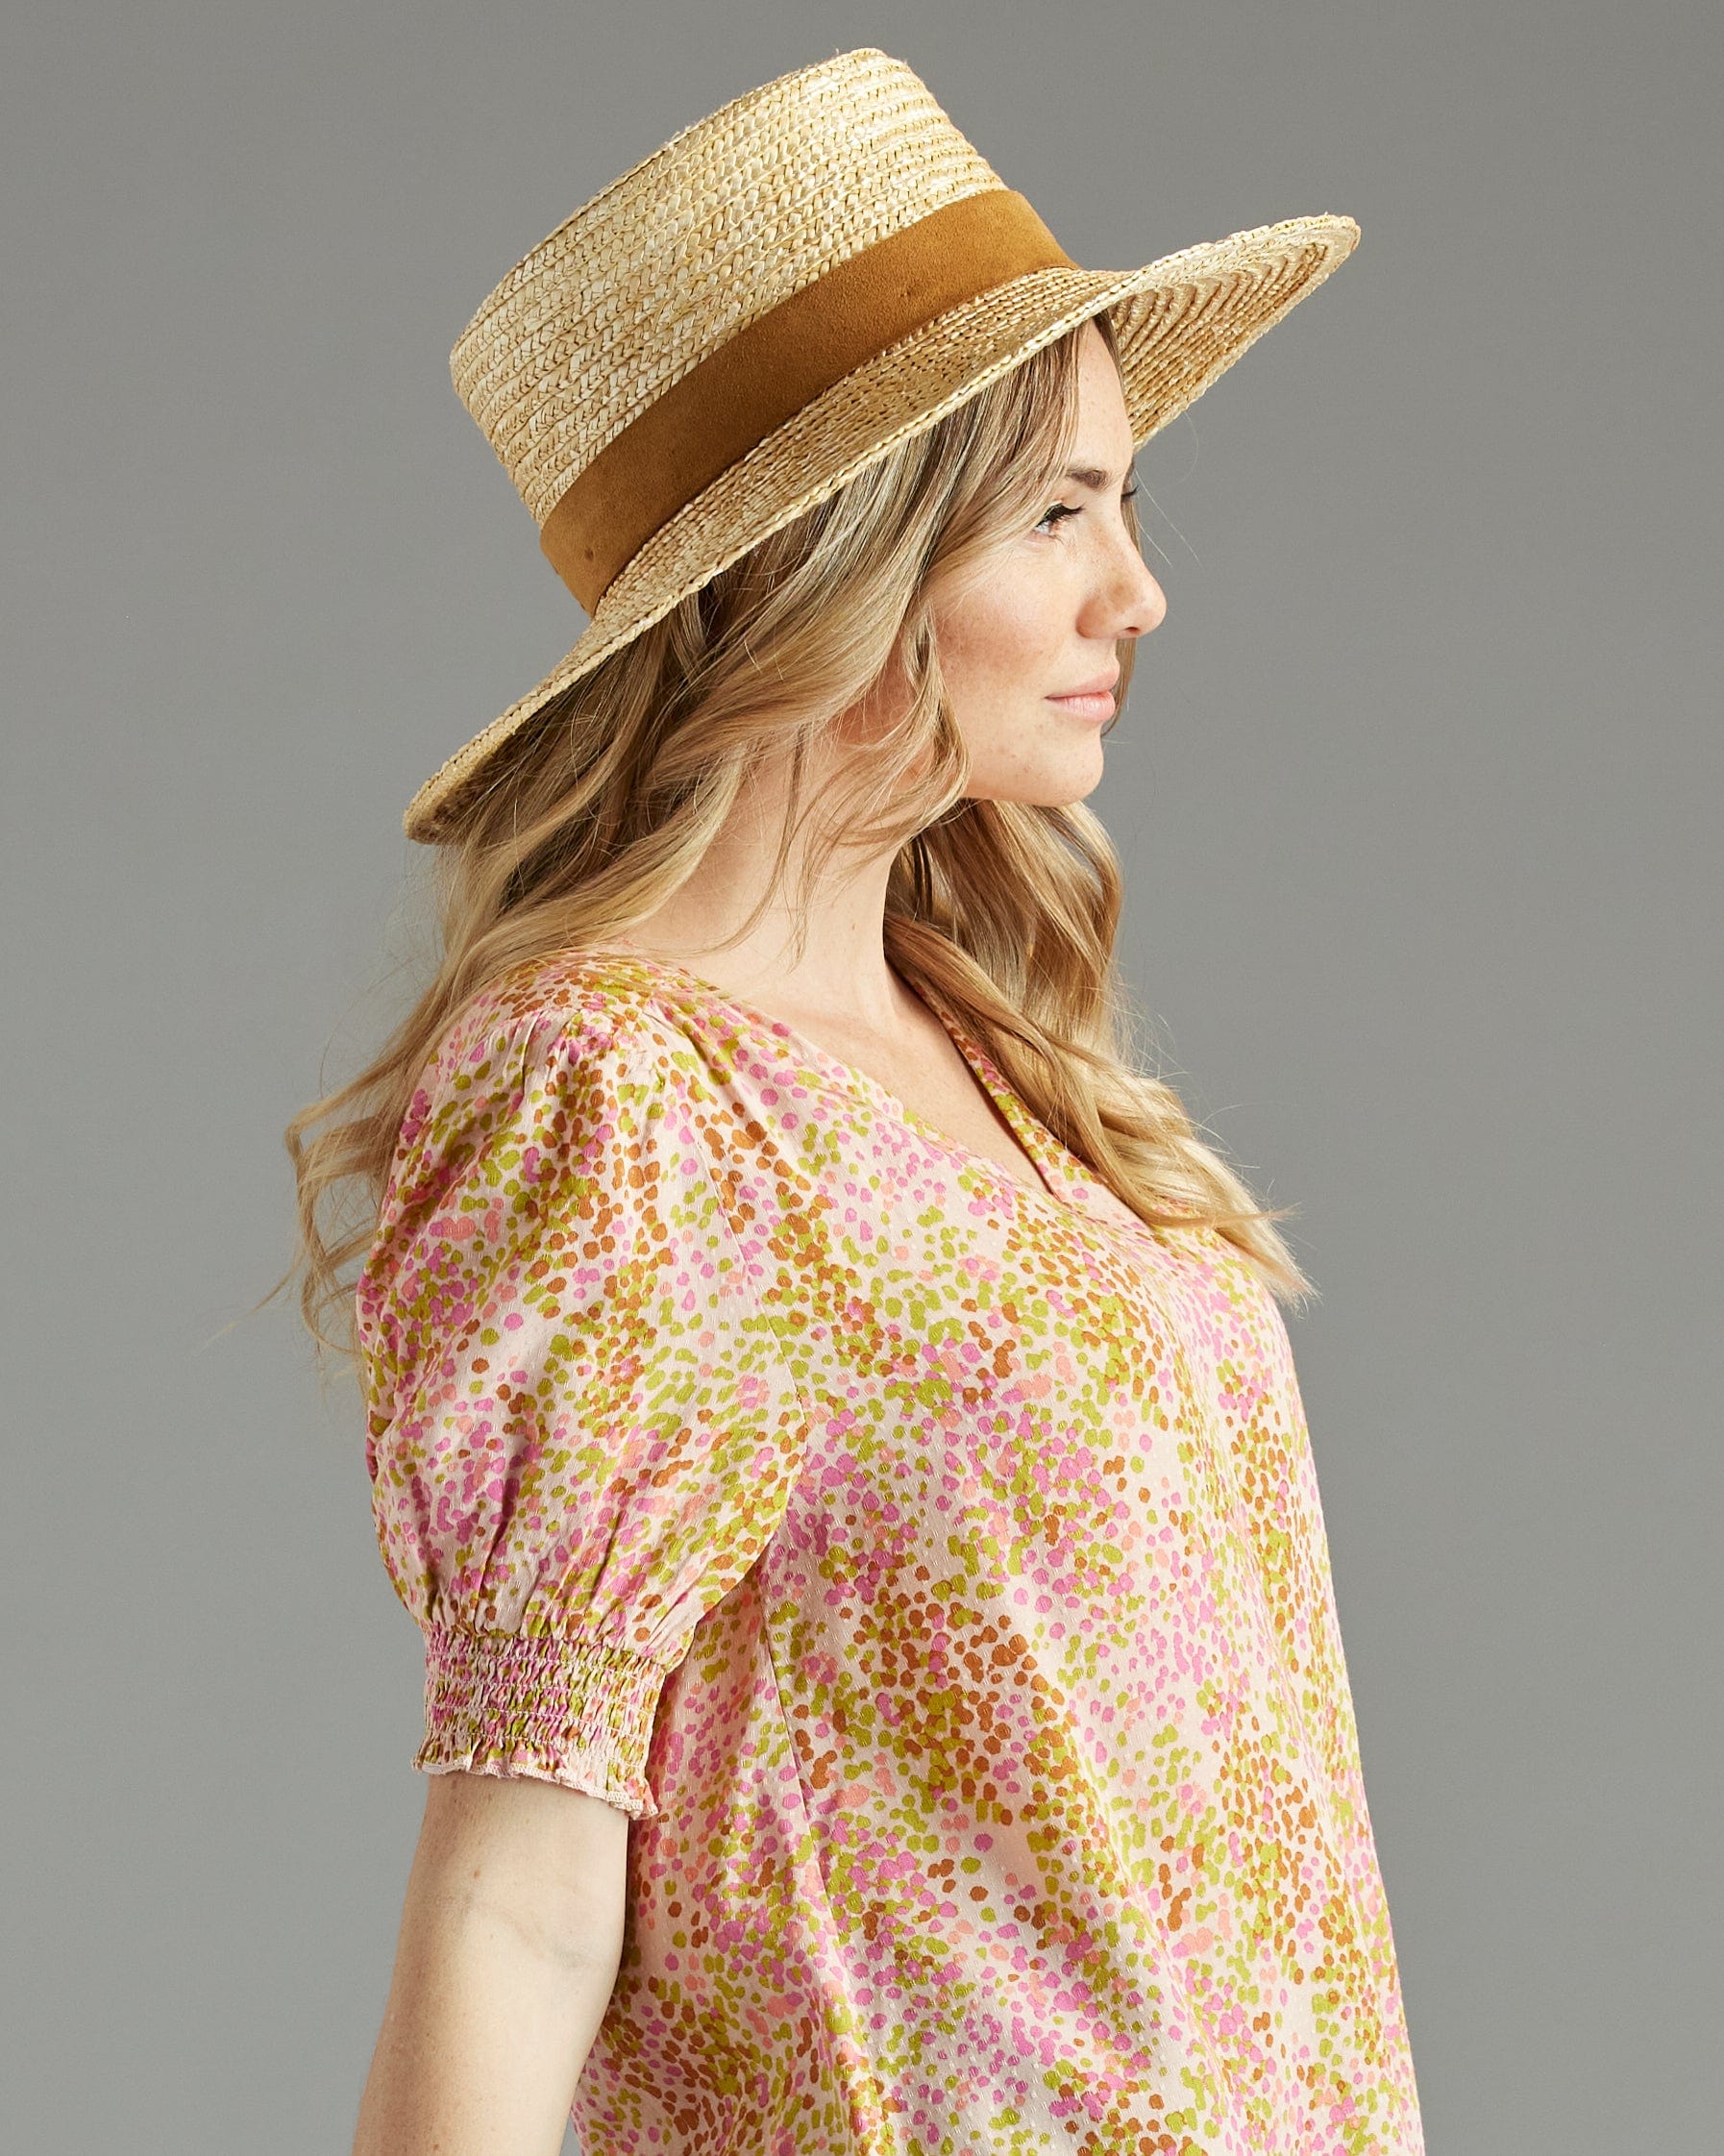 Woman in a yellow and pink print blouse with short sleeves and a v-neck